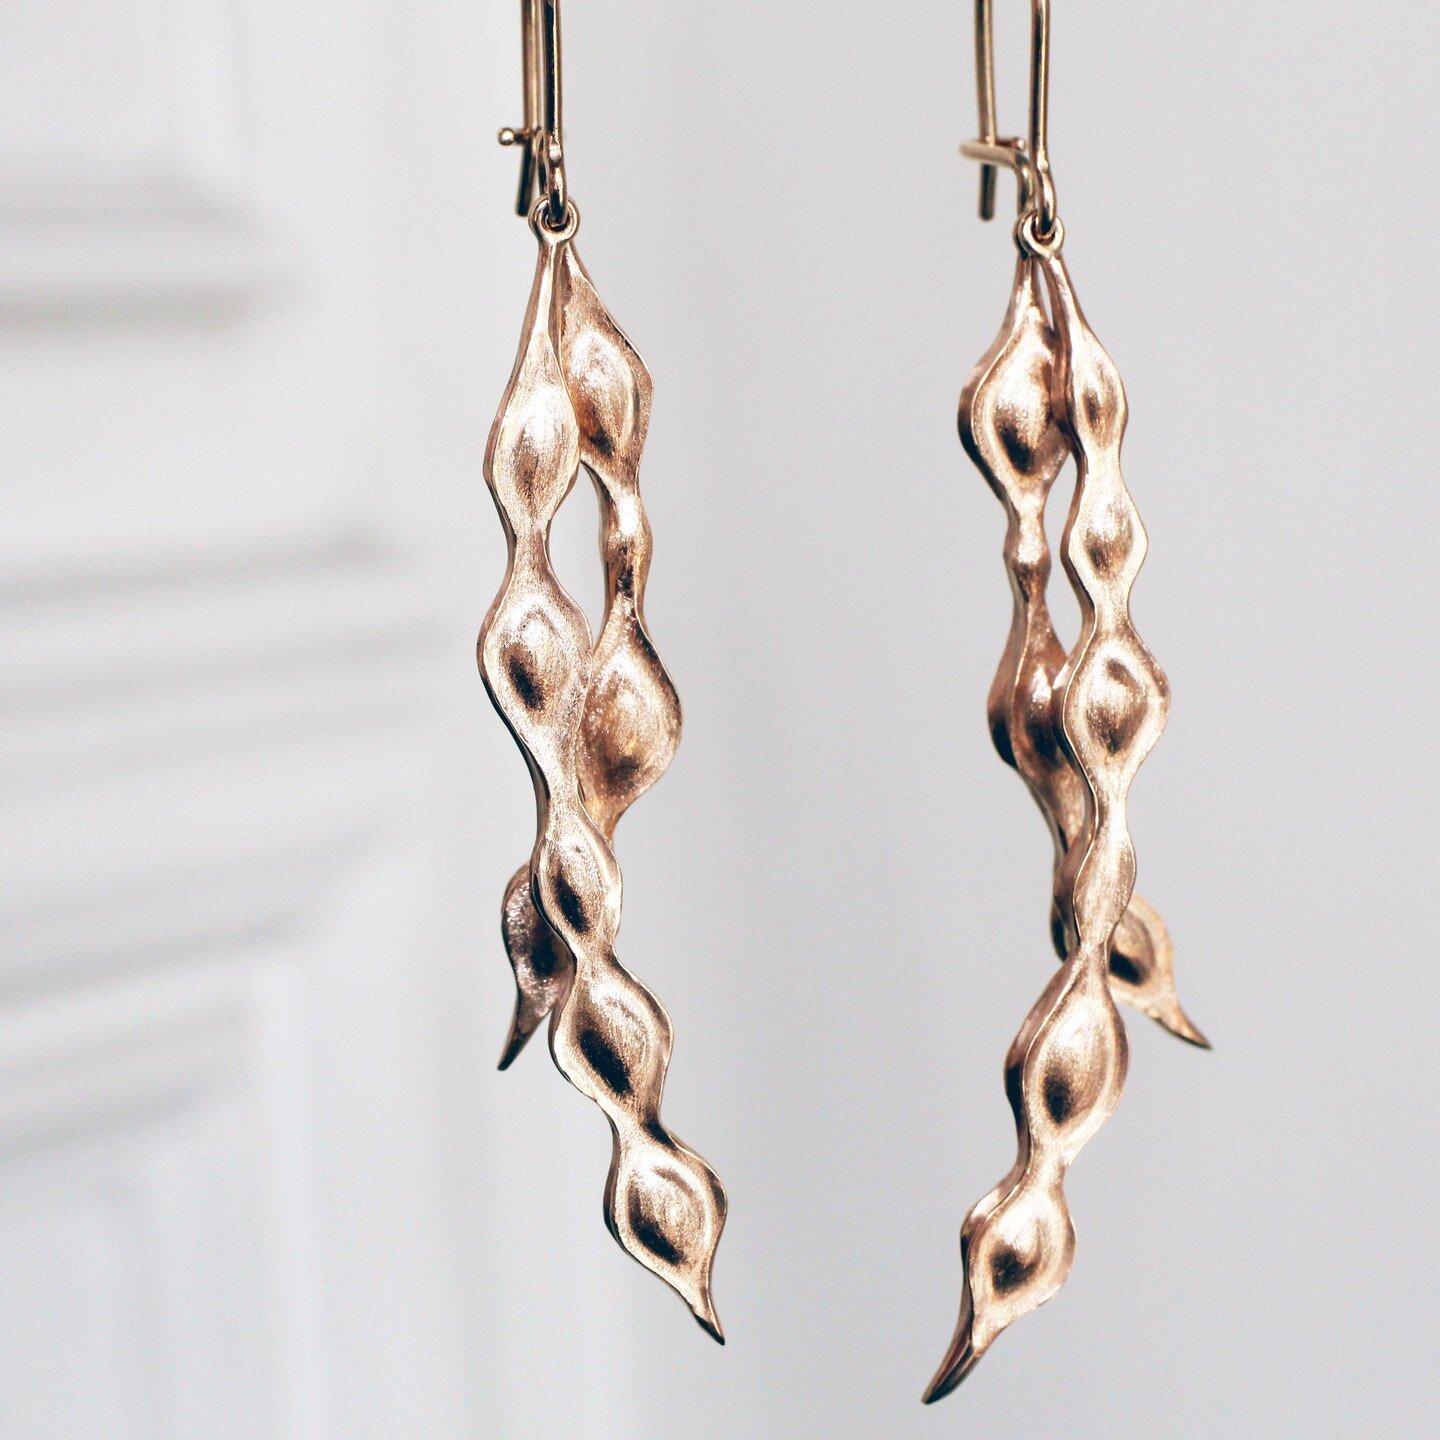 We loved creating these beautiful, bespoke earrings, inspired by Kōwhai pods 🤩